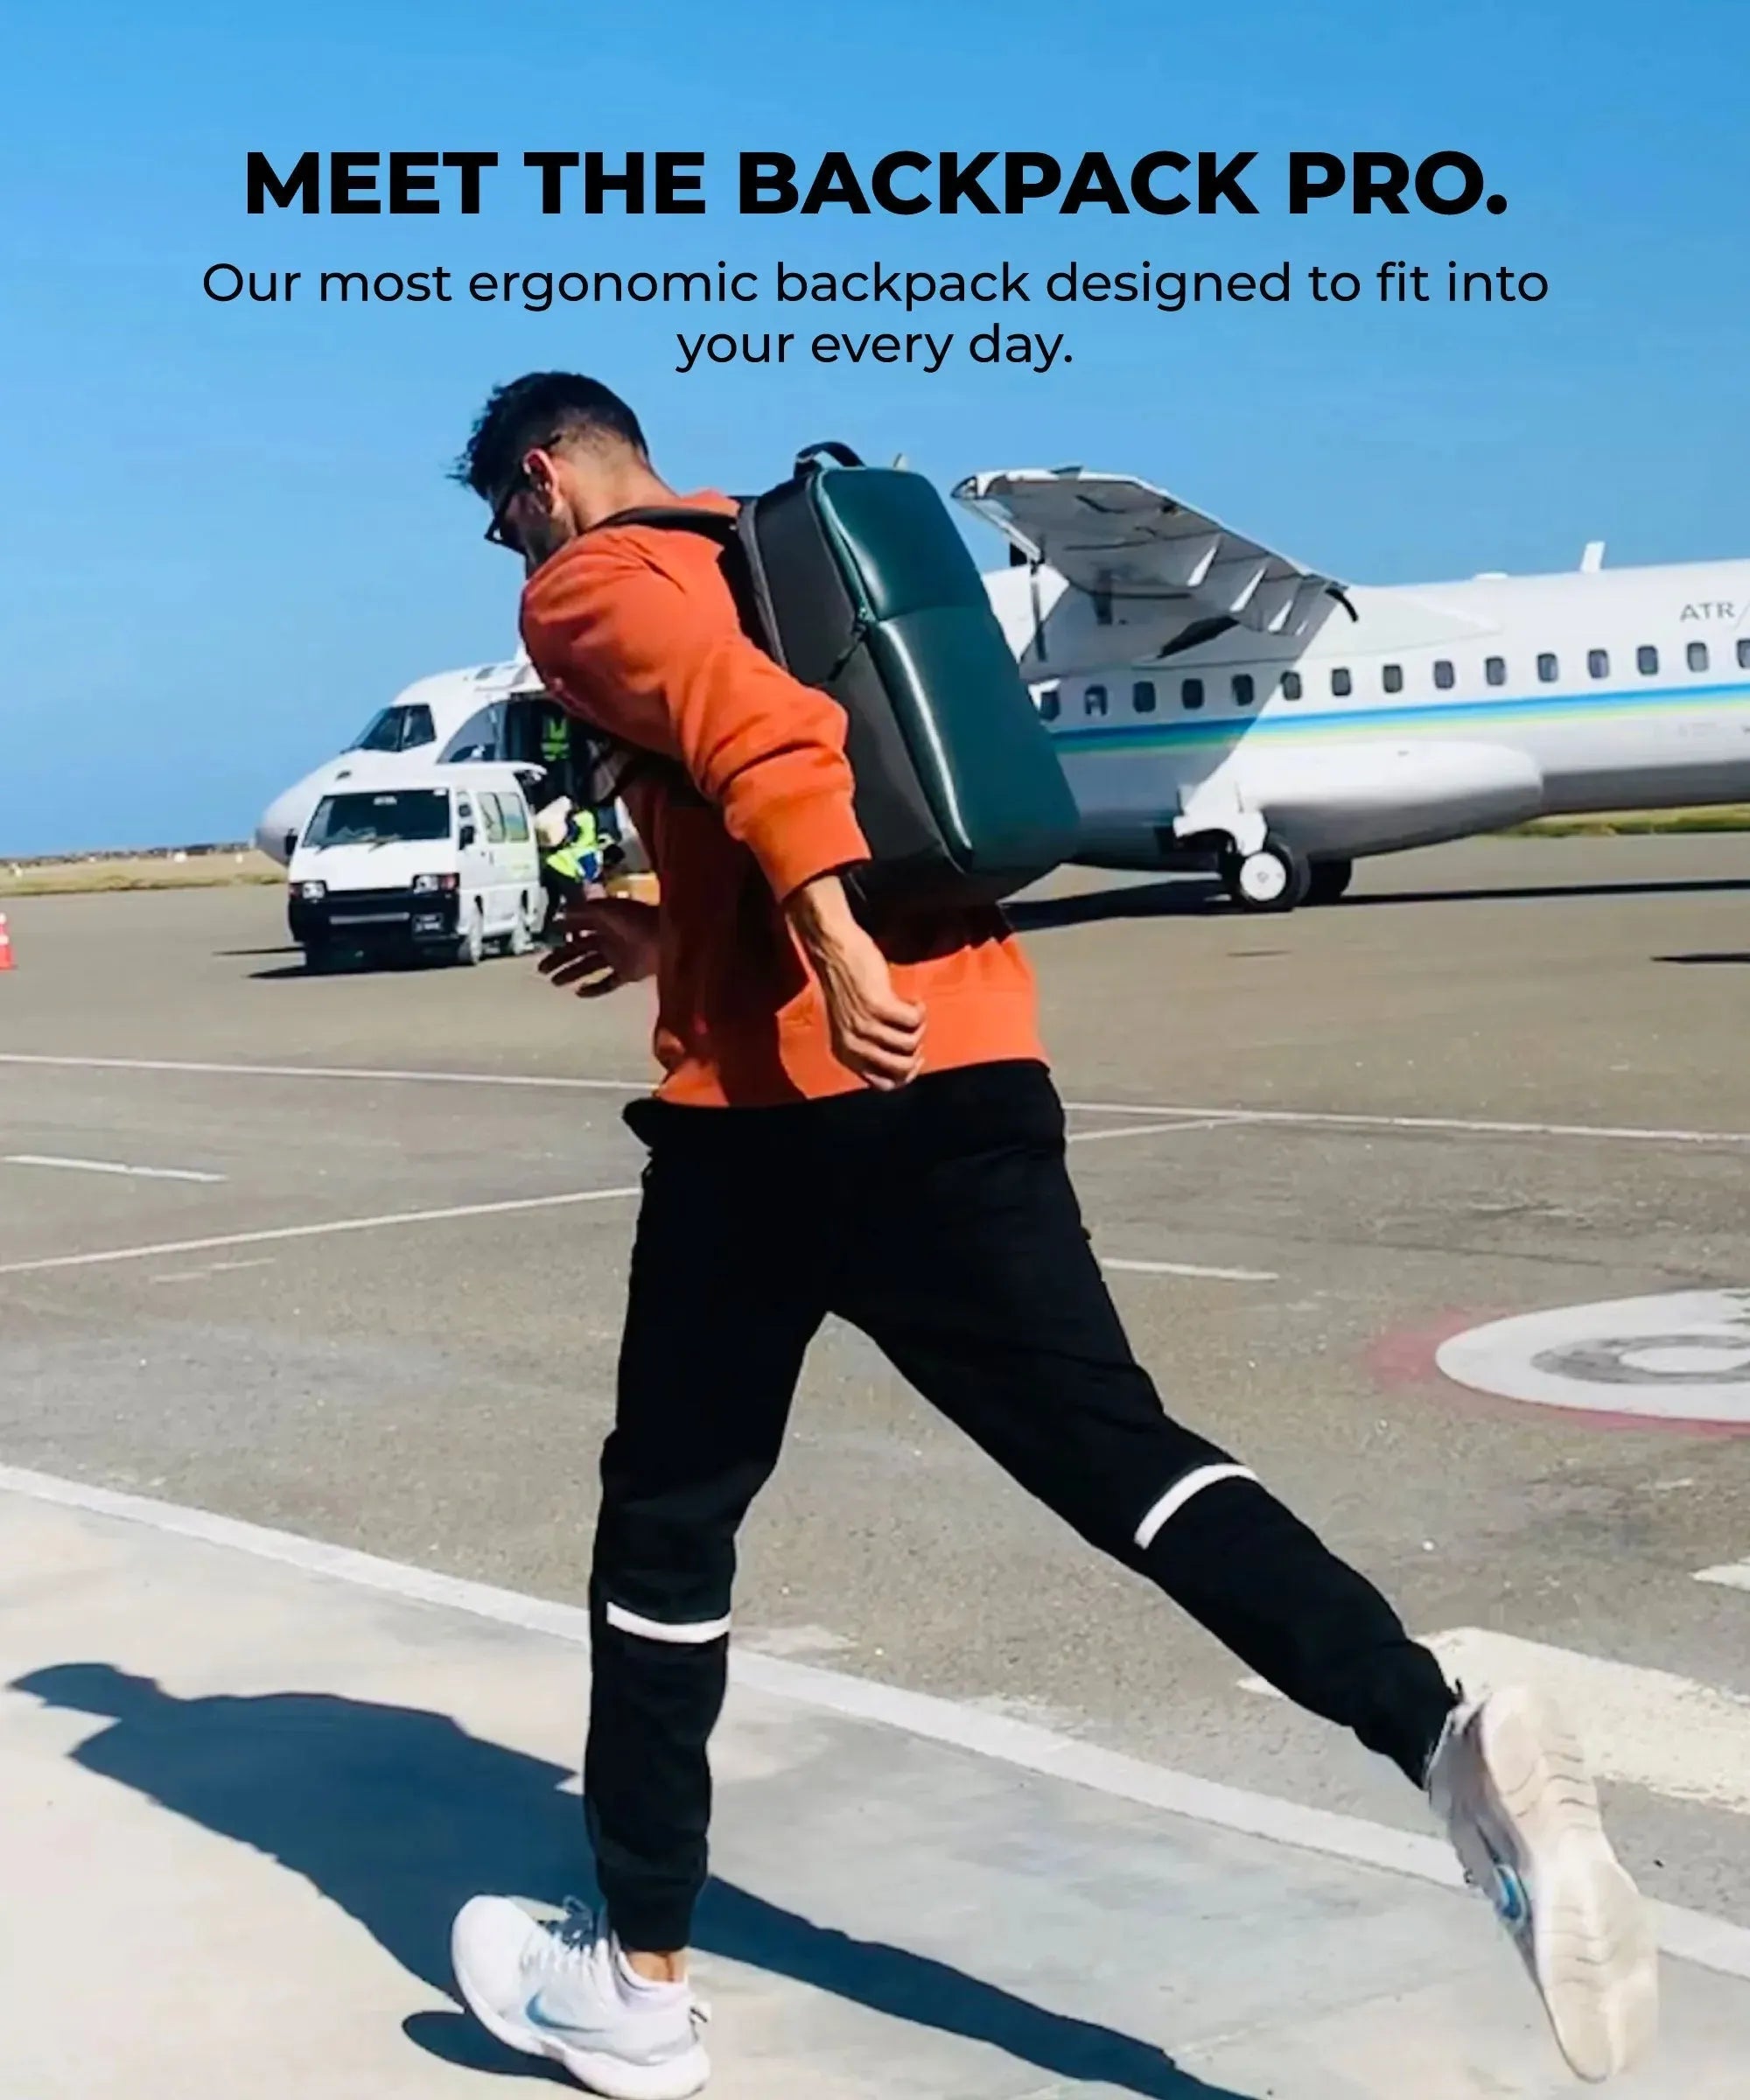 Color_Green Energy (Limited Edition) | The Backpack Pro